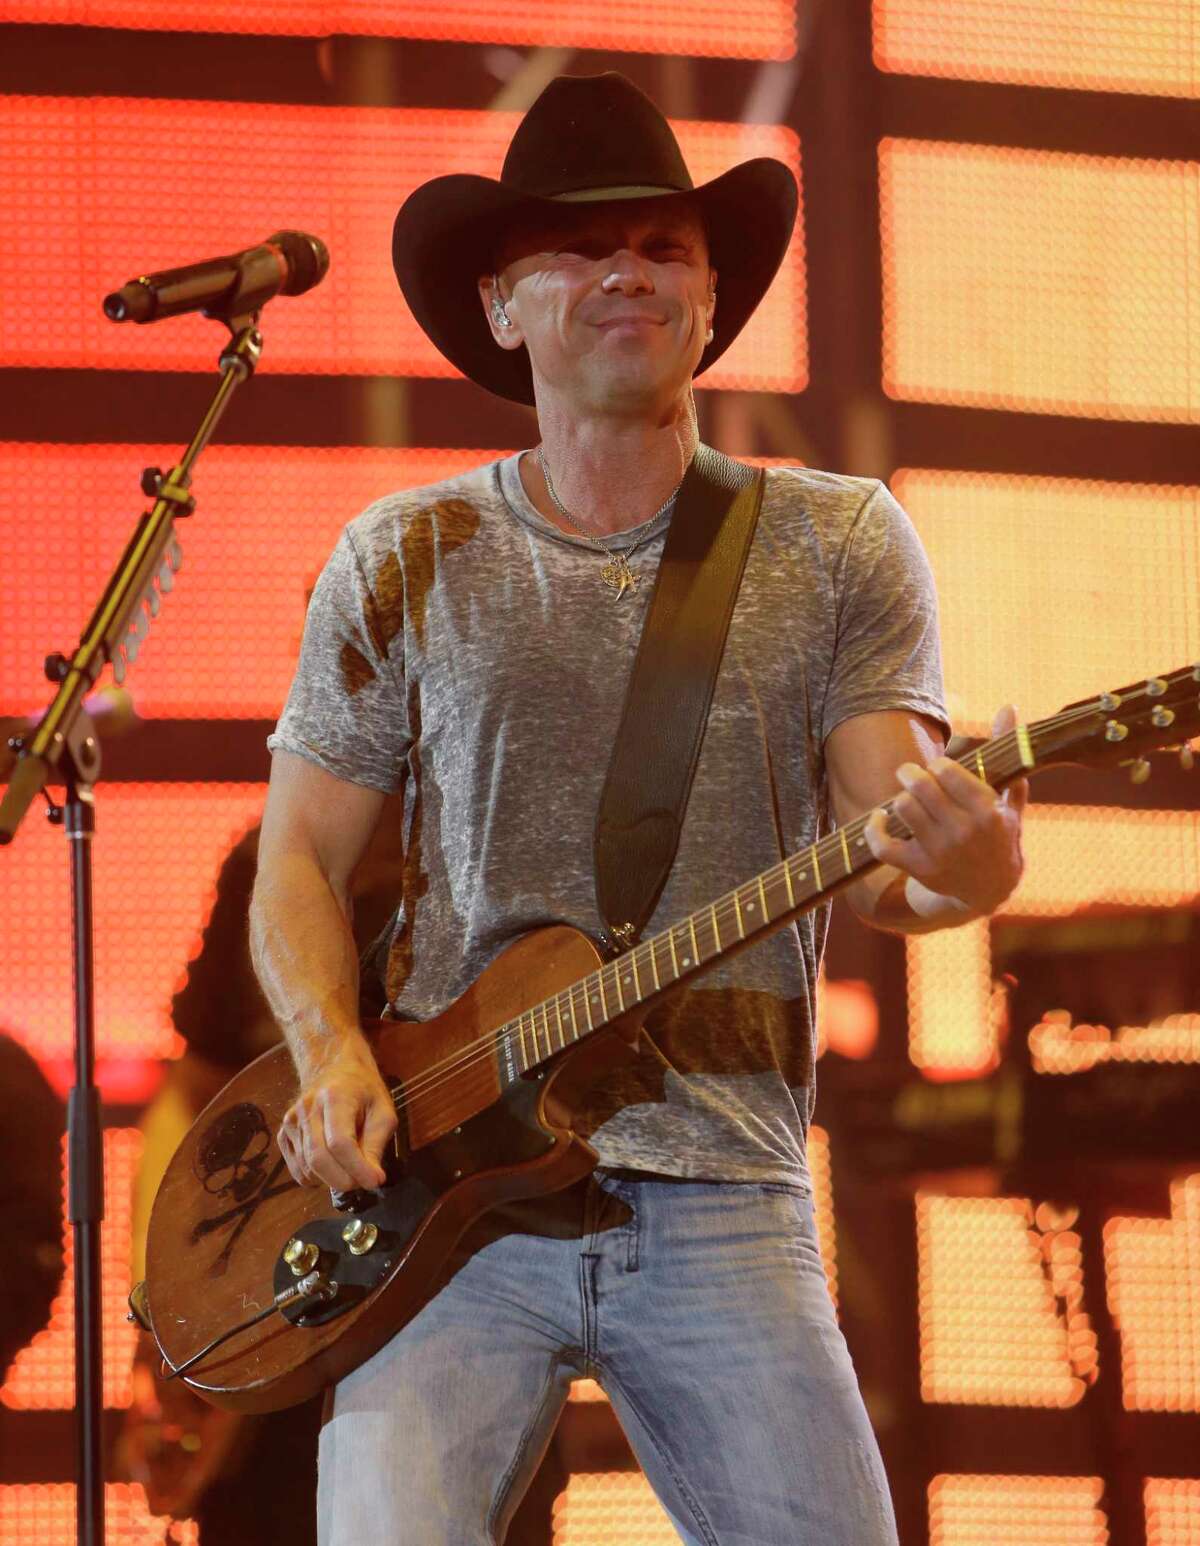 Kenny Chesney performs at RodeoHouston during the Houston Livestock Show and Rodeo in NRG Stadium Monday, March 14, 2016, in Houston. ( Melissa Phillip / Houston Chronicle )